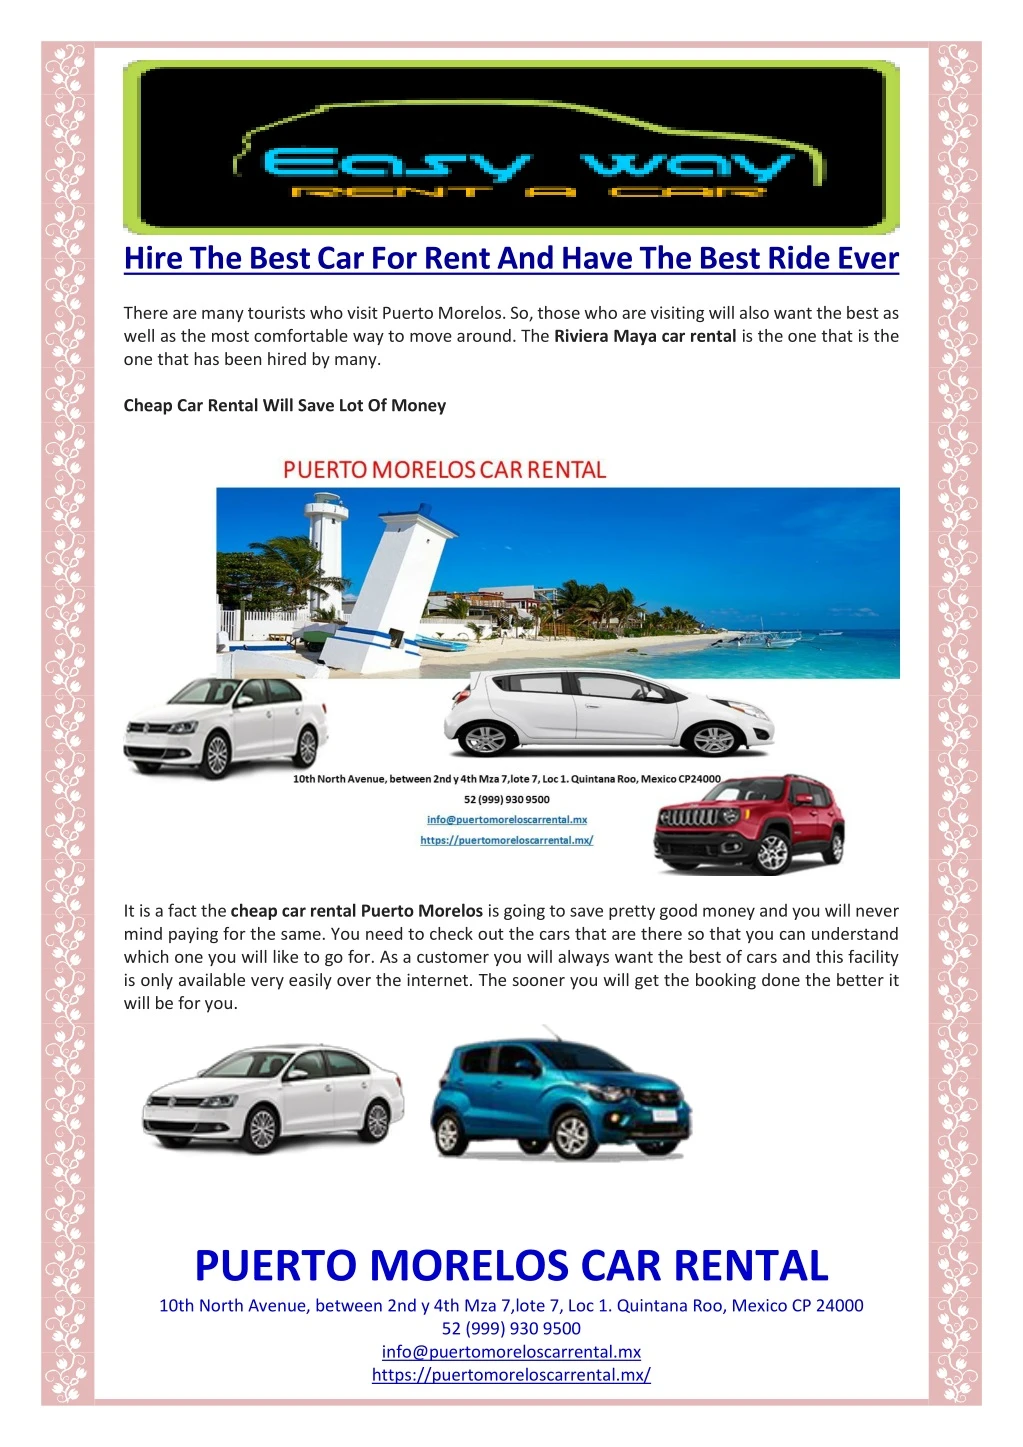 hire the best car for rent and have the best ride